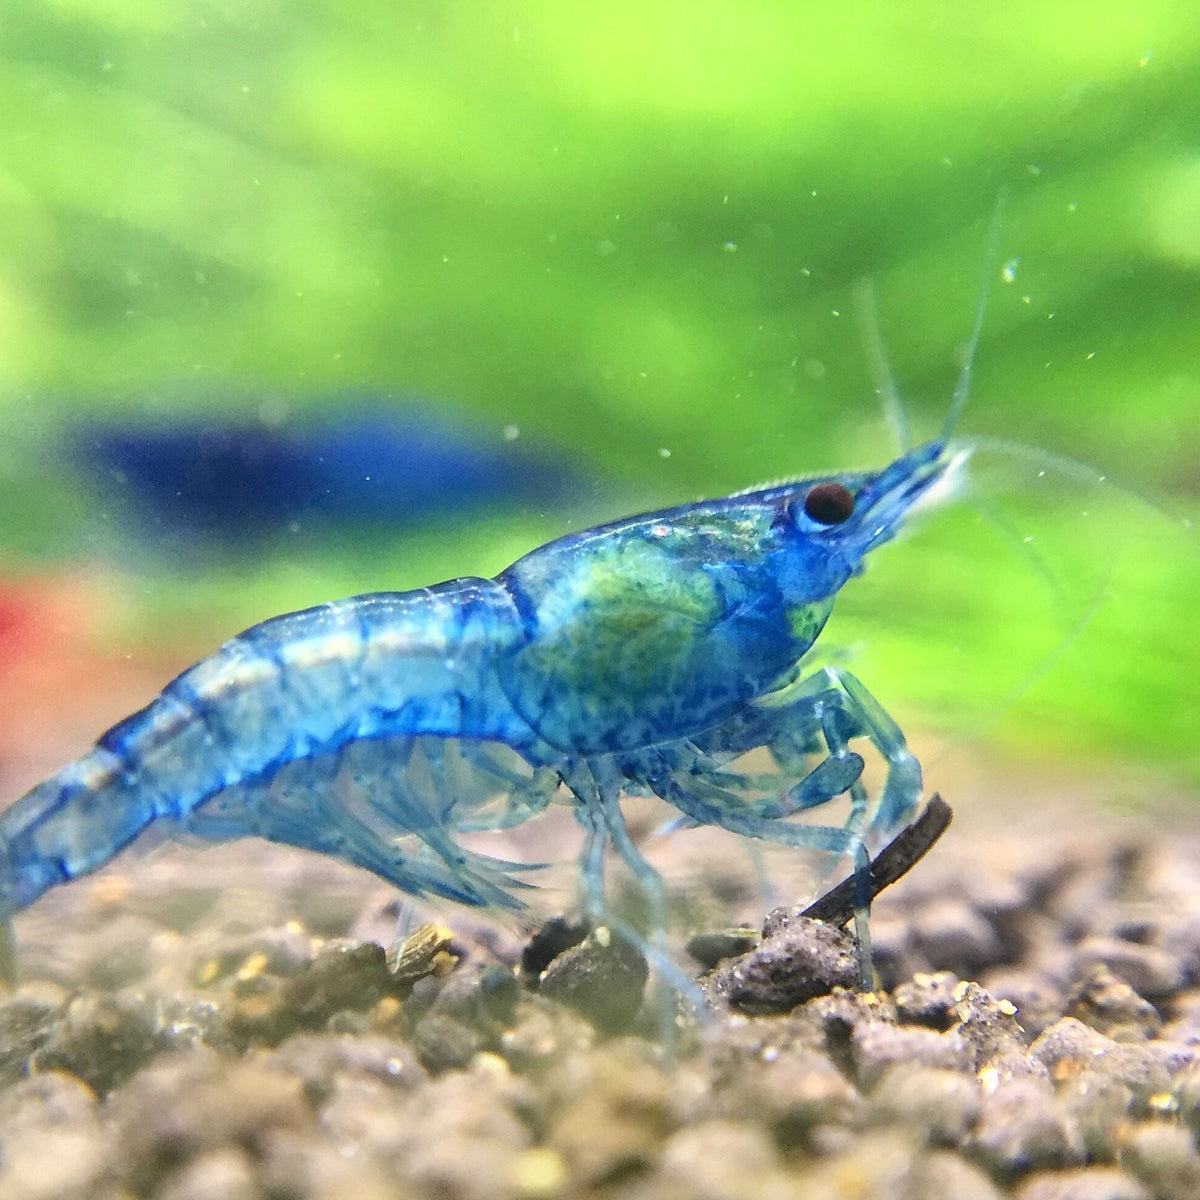 A Beginner's Guide to Keeping Shrimp in a Planted Aquarium — Buce